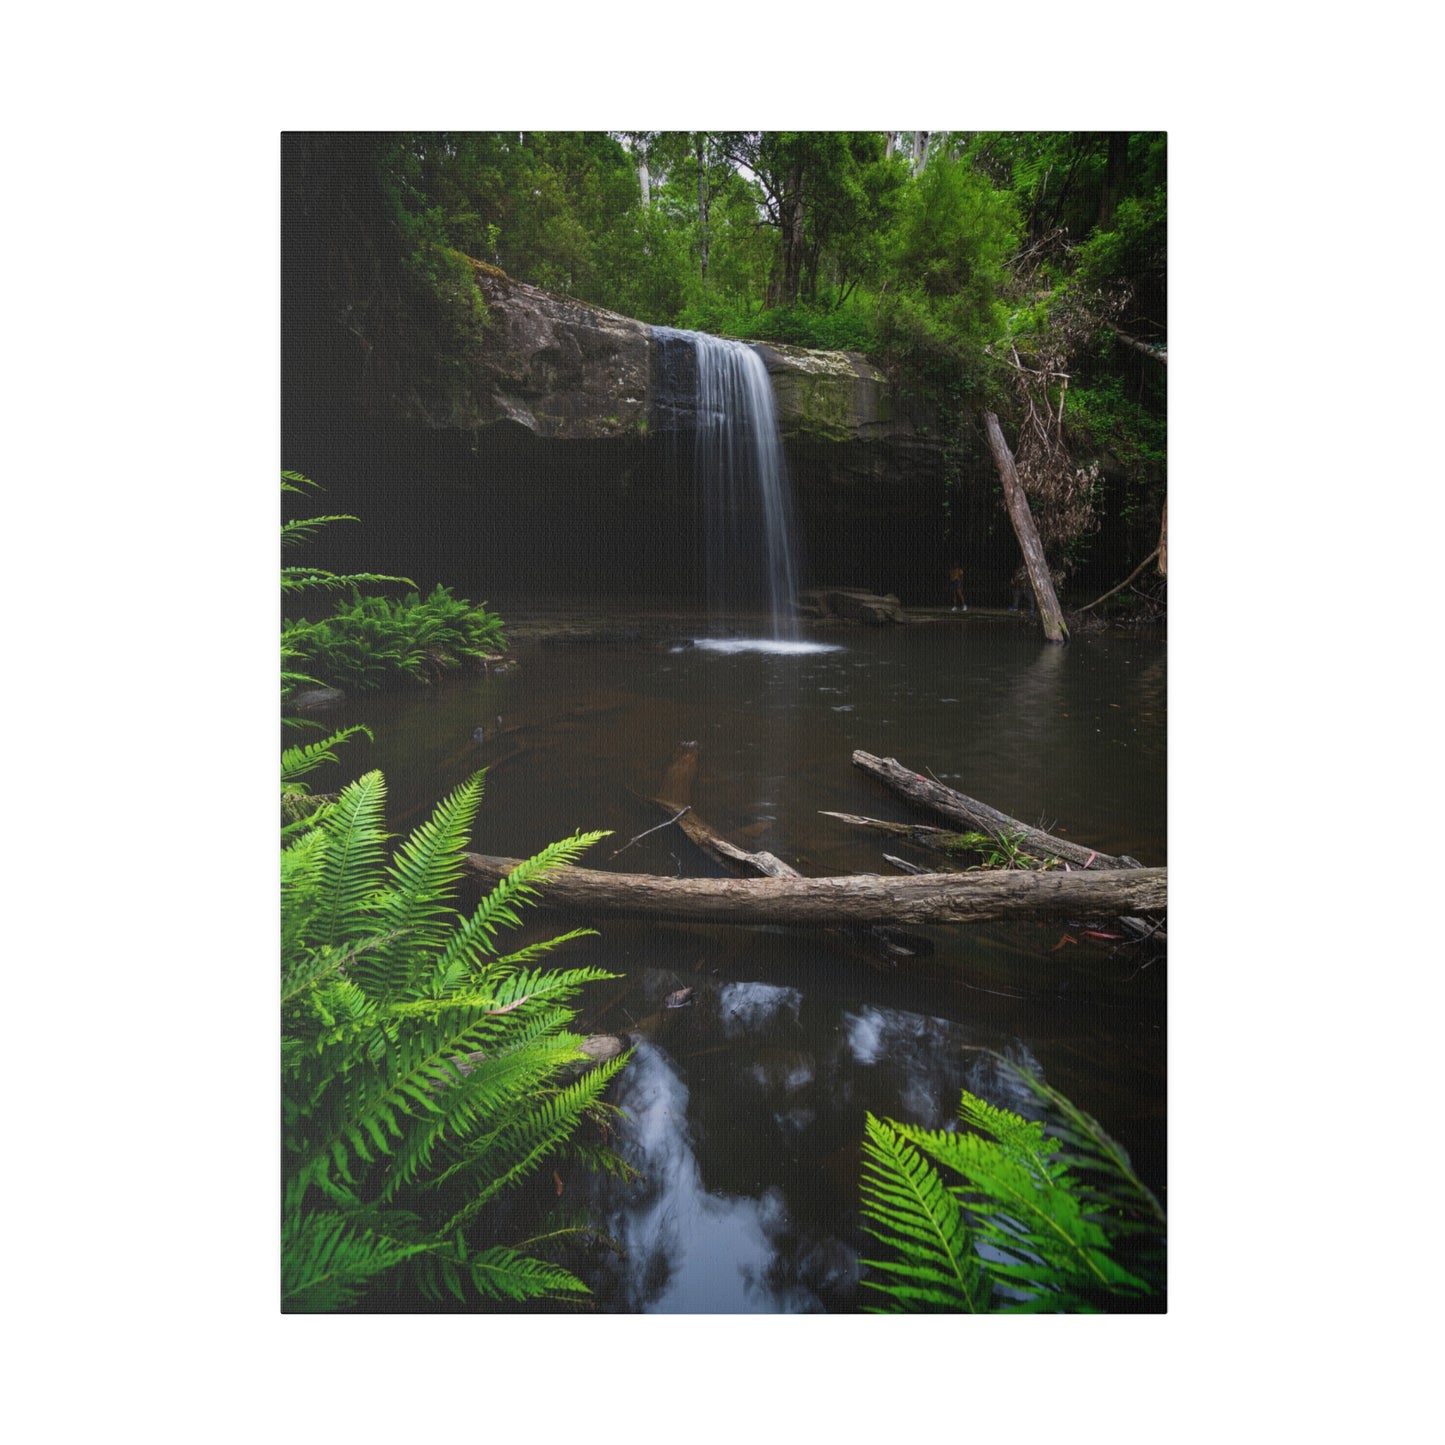 The beautiful Lower Kalimna Falls printed on a stretched matte canvas